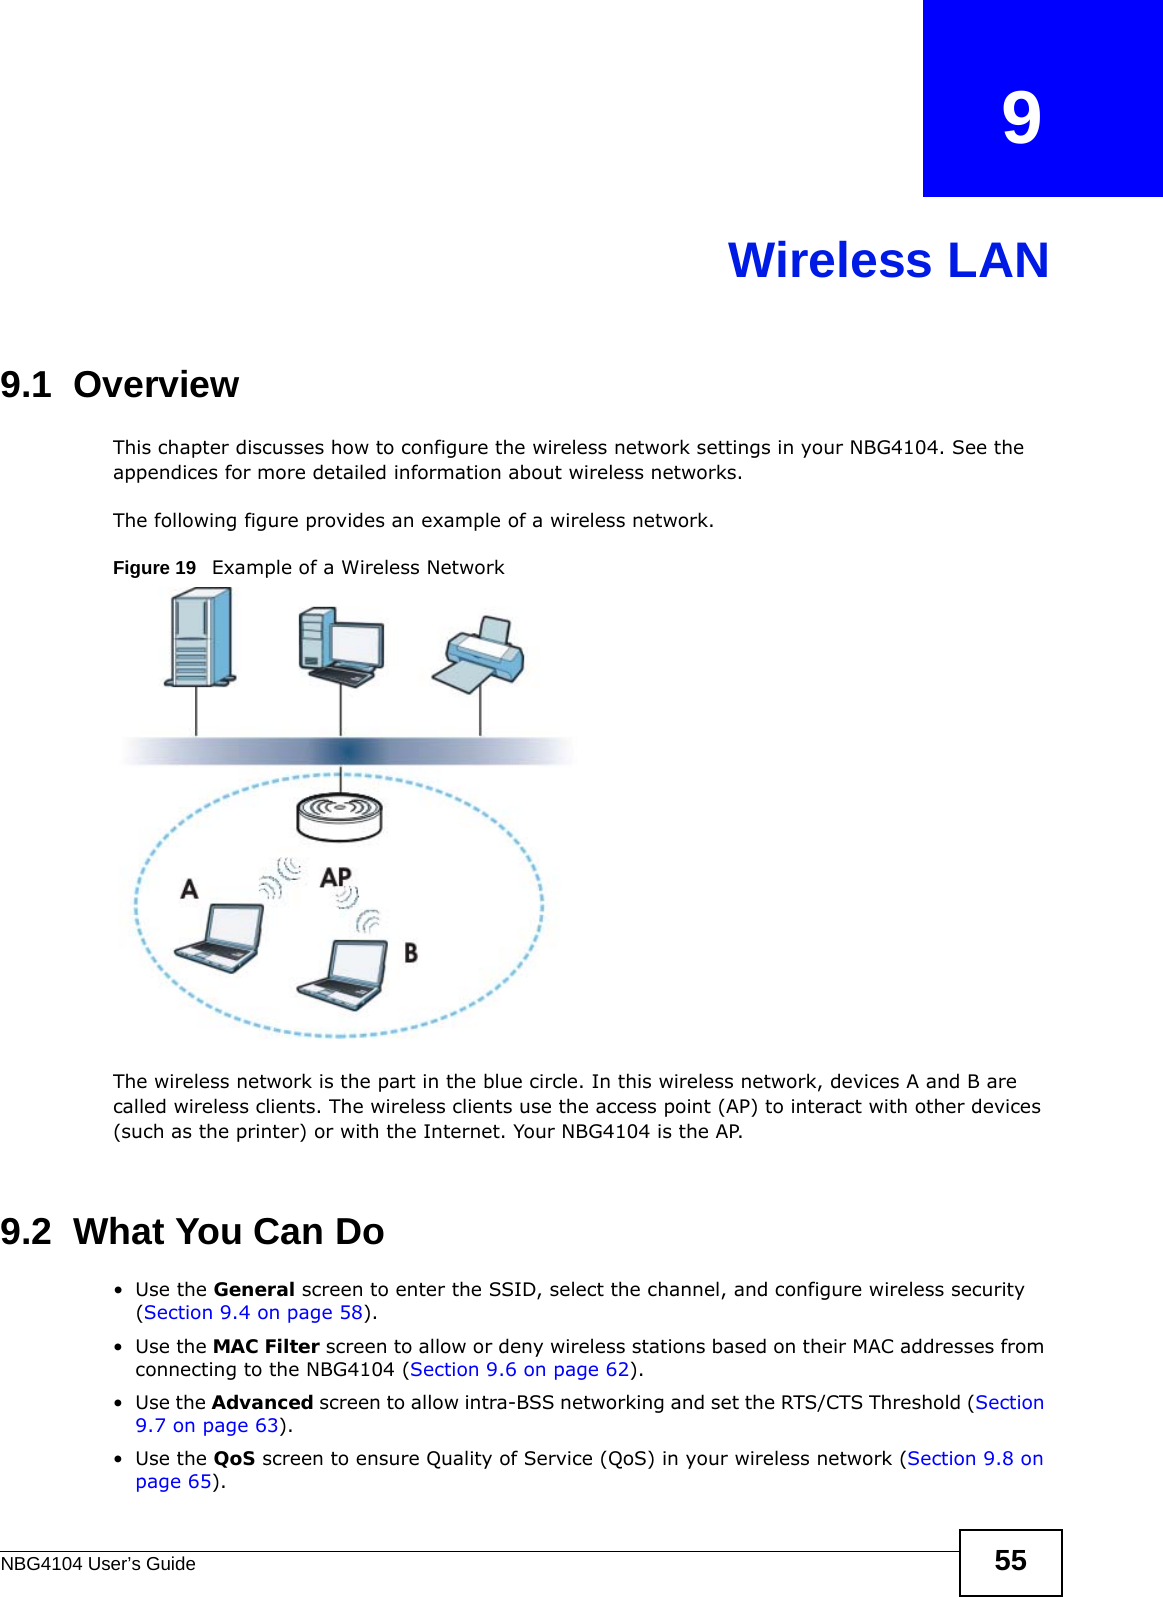 NBG4104 User’s Guide 55CHAPTER   9Wireless LAN9.1  OverviewThis chapter discusses how to configure the wireless network settings in your NBG4104. See the appendices for more detailed information about wireless networks.The following figure provides an example of a wireless network.Figure 19   Example of a Wireless NetworkThe wireless network is the part in the blue circle. In this wireless network, devices A and B are called wireless clients. The wireless clients use the access point (AP) to interact with other devices (such as the printer) or with the Internet. Your NBG4104 is the AP.9.2  What You Can Do•Use the General screen to enter the SSID, select the channel, and configure wireless security (Section 9.4 on page 58).•Use the MAC Filter screen to allow or deny wireless stations based on their MAC addresses from connecting to the NBG4104 (Section 9.6 on page 62).•Use the Advanced screen to allow intra-BSS networking and set the RTS/CTS Threshold (Section 9.7 on page 63).•Use the QoS screen to ensure Quality of Service (QoS) in your wireless network (Section 9.8 on page 65).